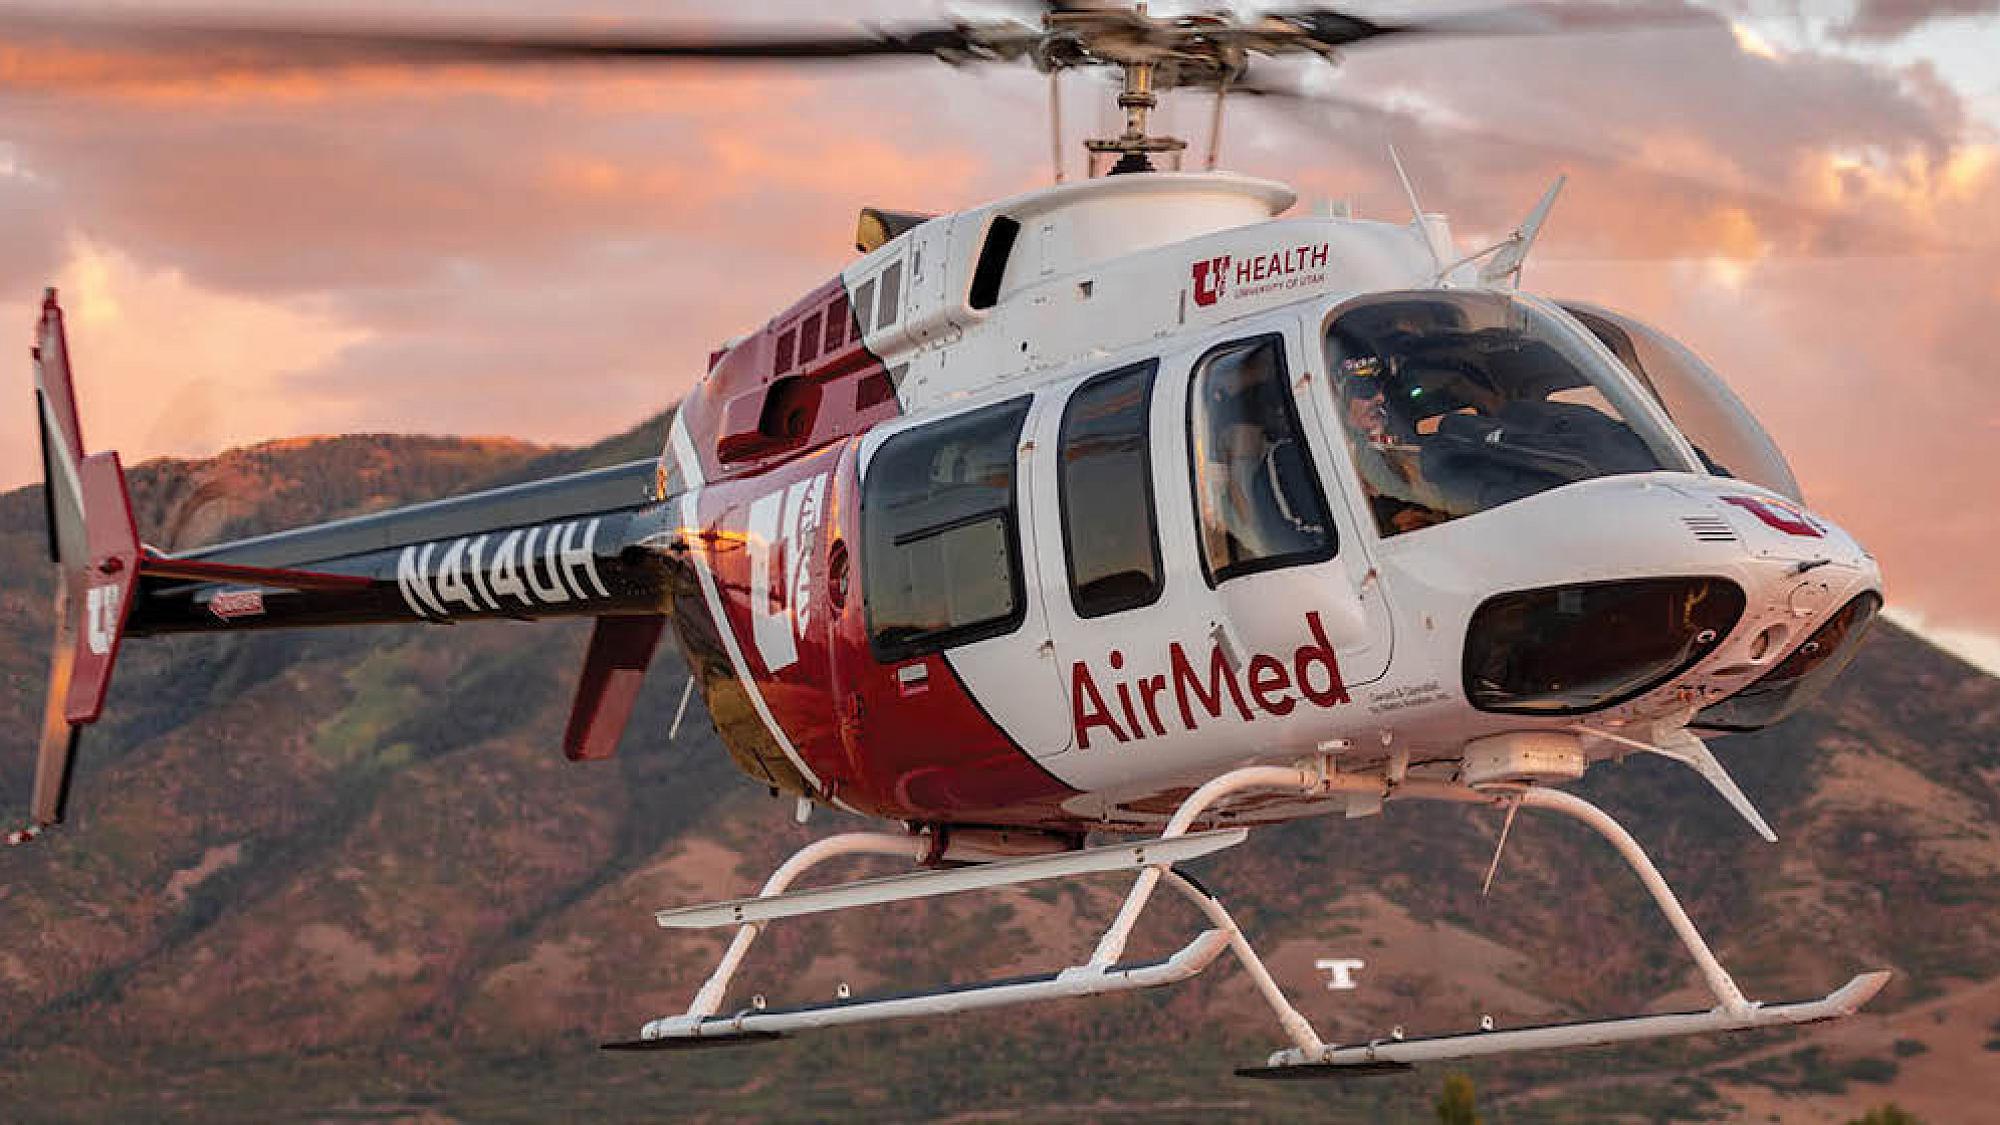 Angels in the Sky — AirMed, University of Utah Health's air ambulance service